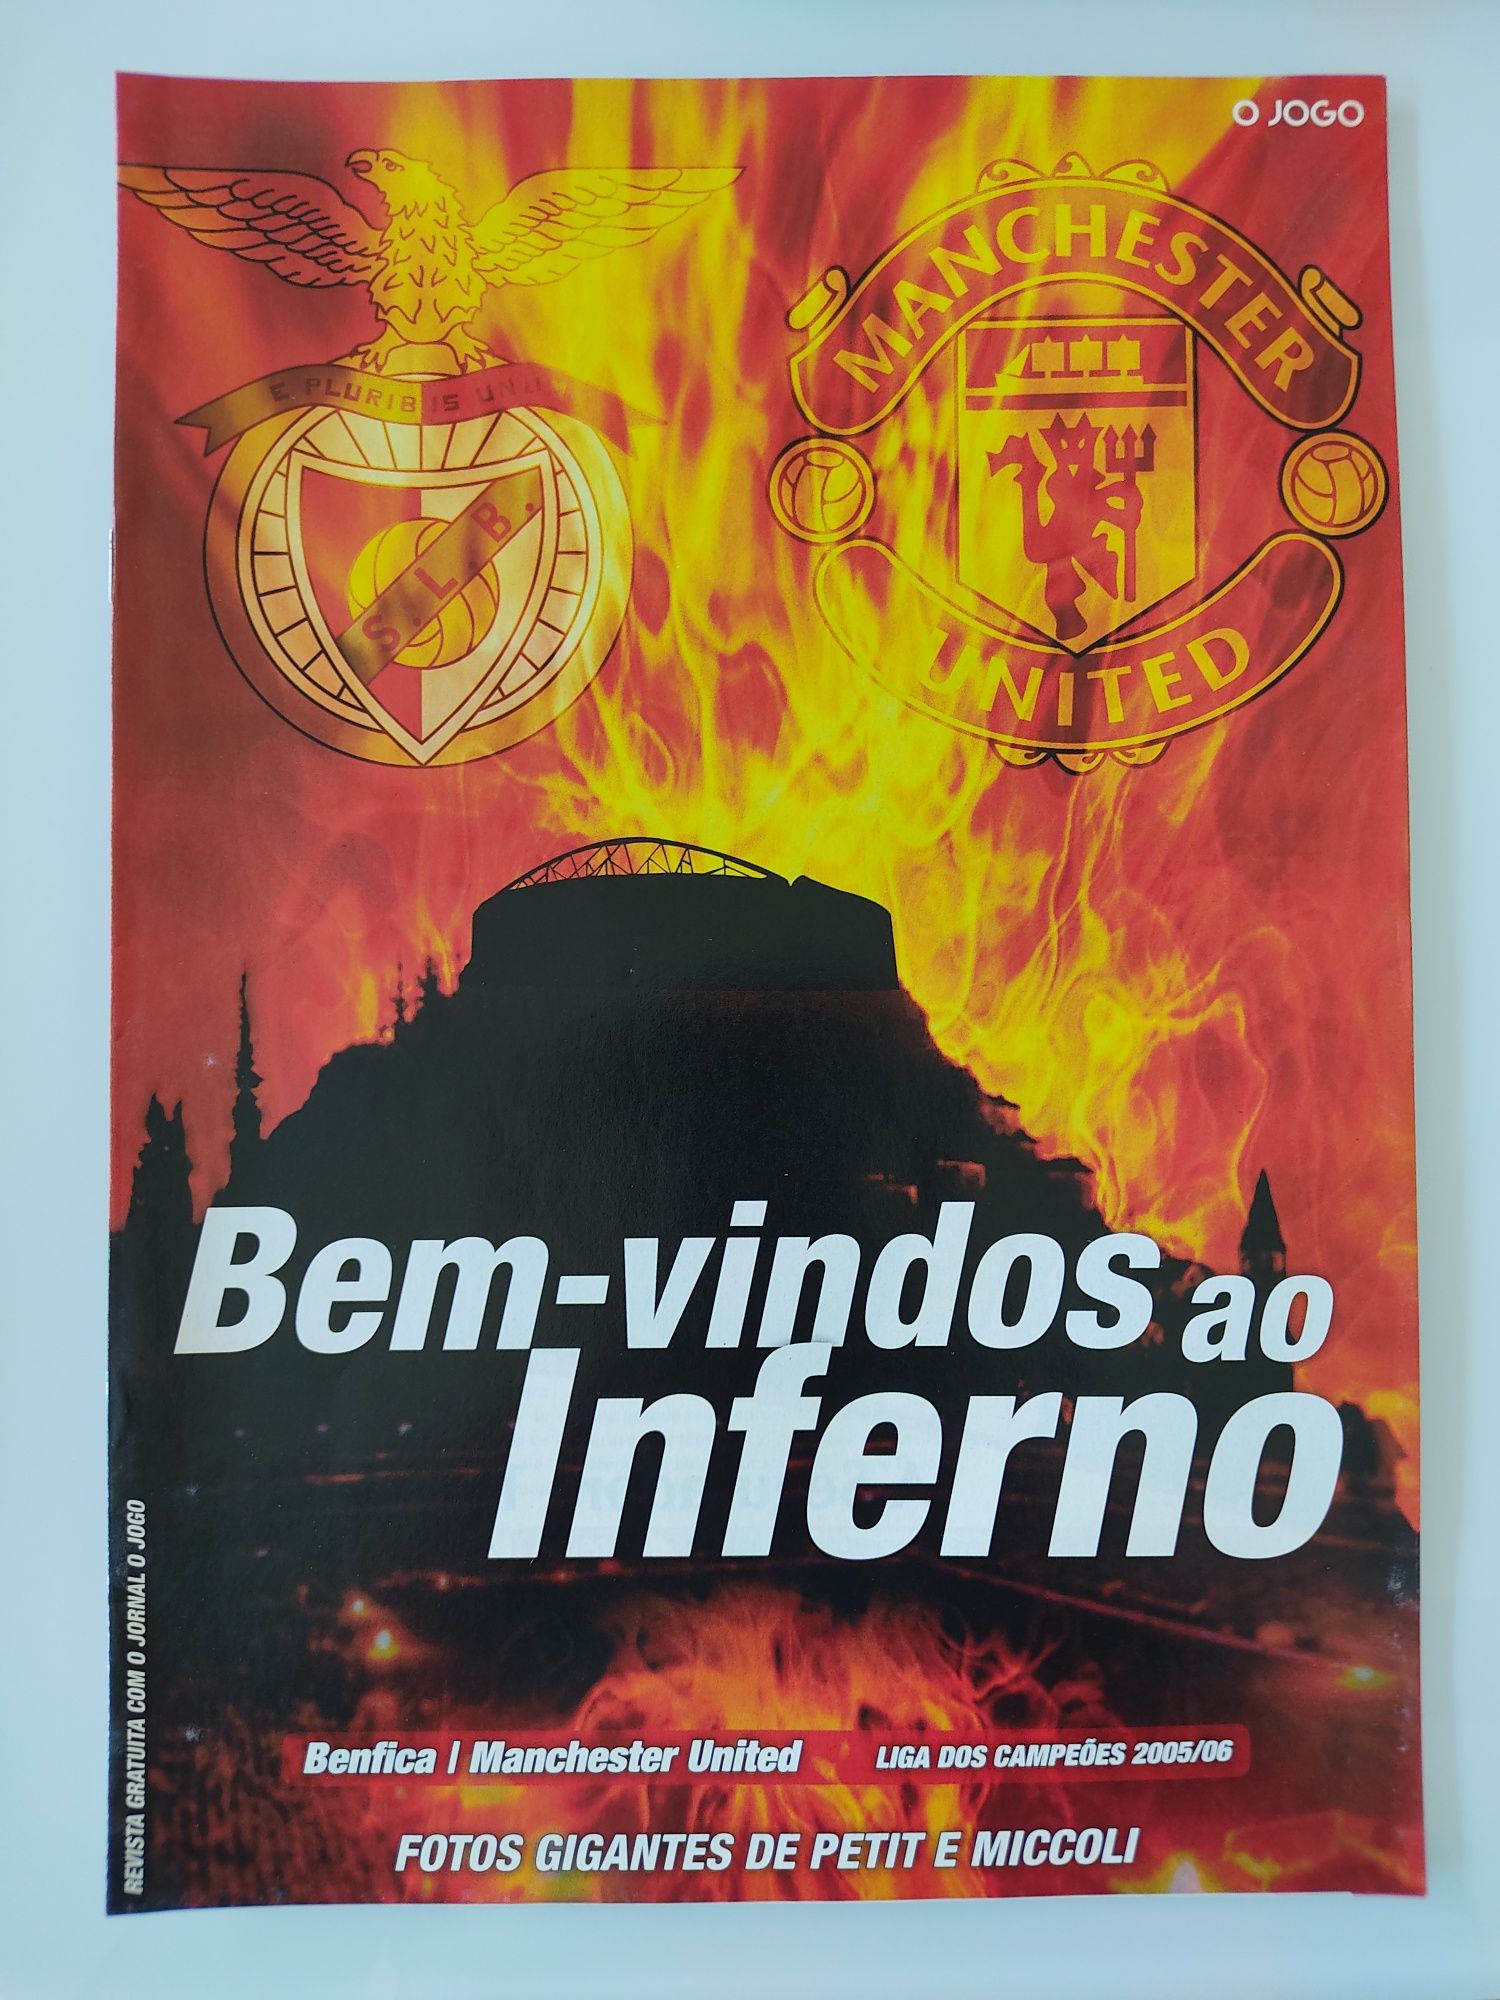 Programa do Benfica Manchester United Champions league 2005/2006